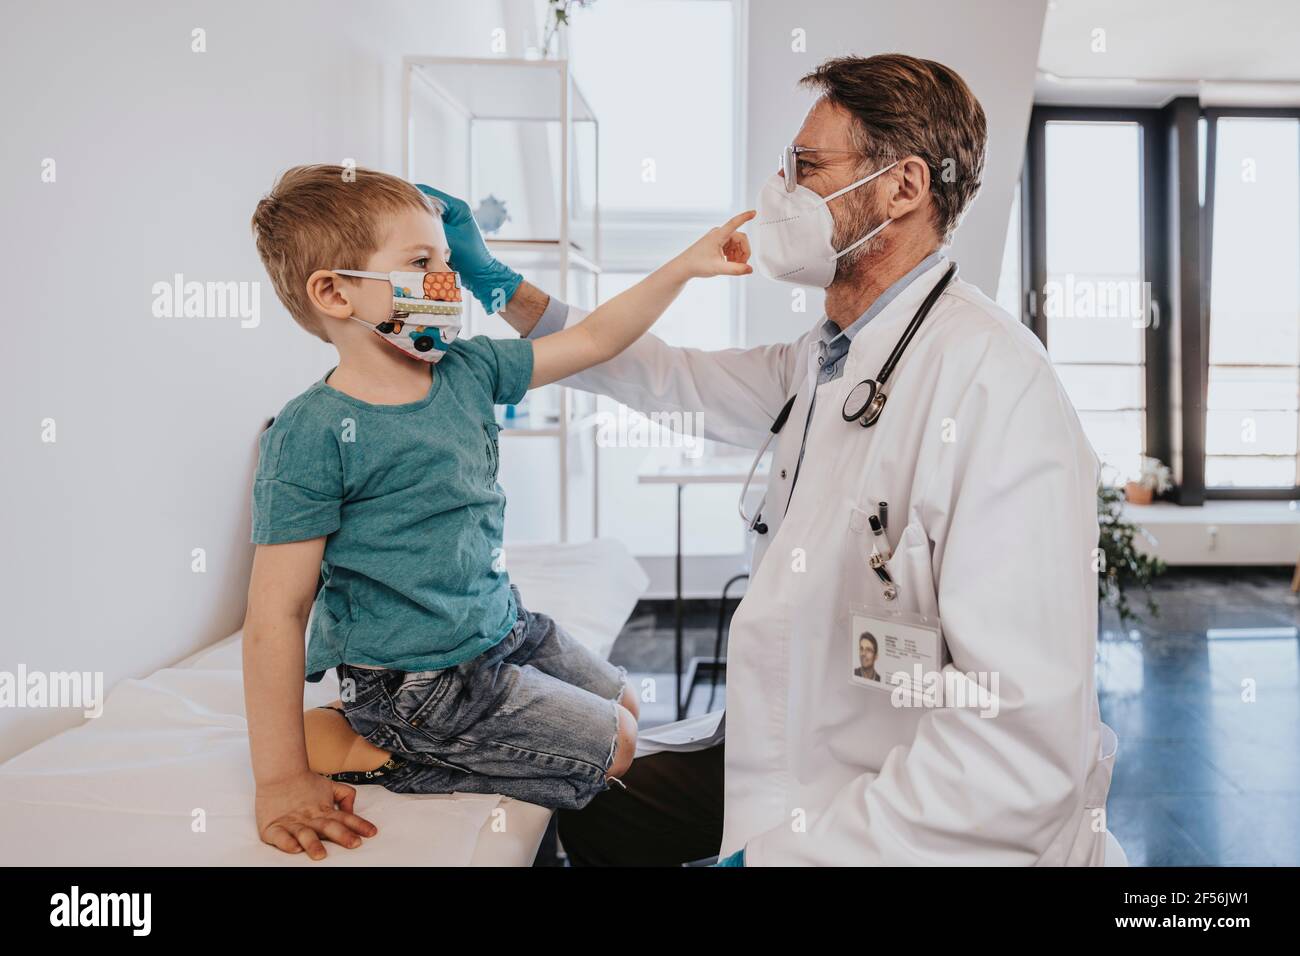 Male pediatrician with protective face mask checking boy in medical examination room Stock Photo